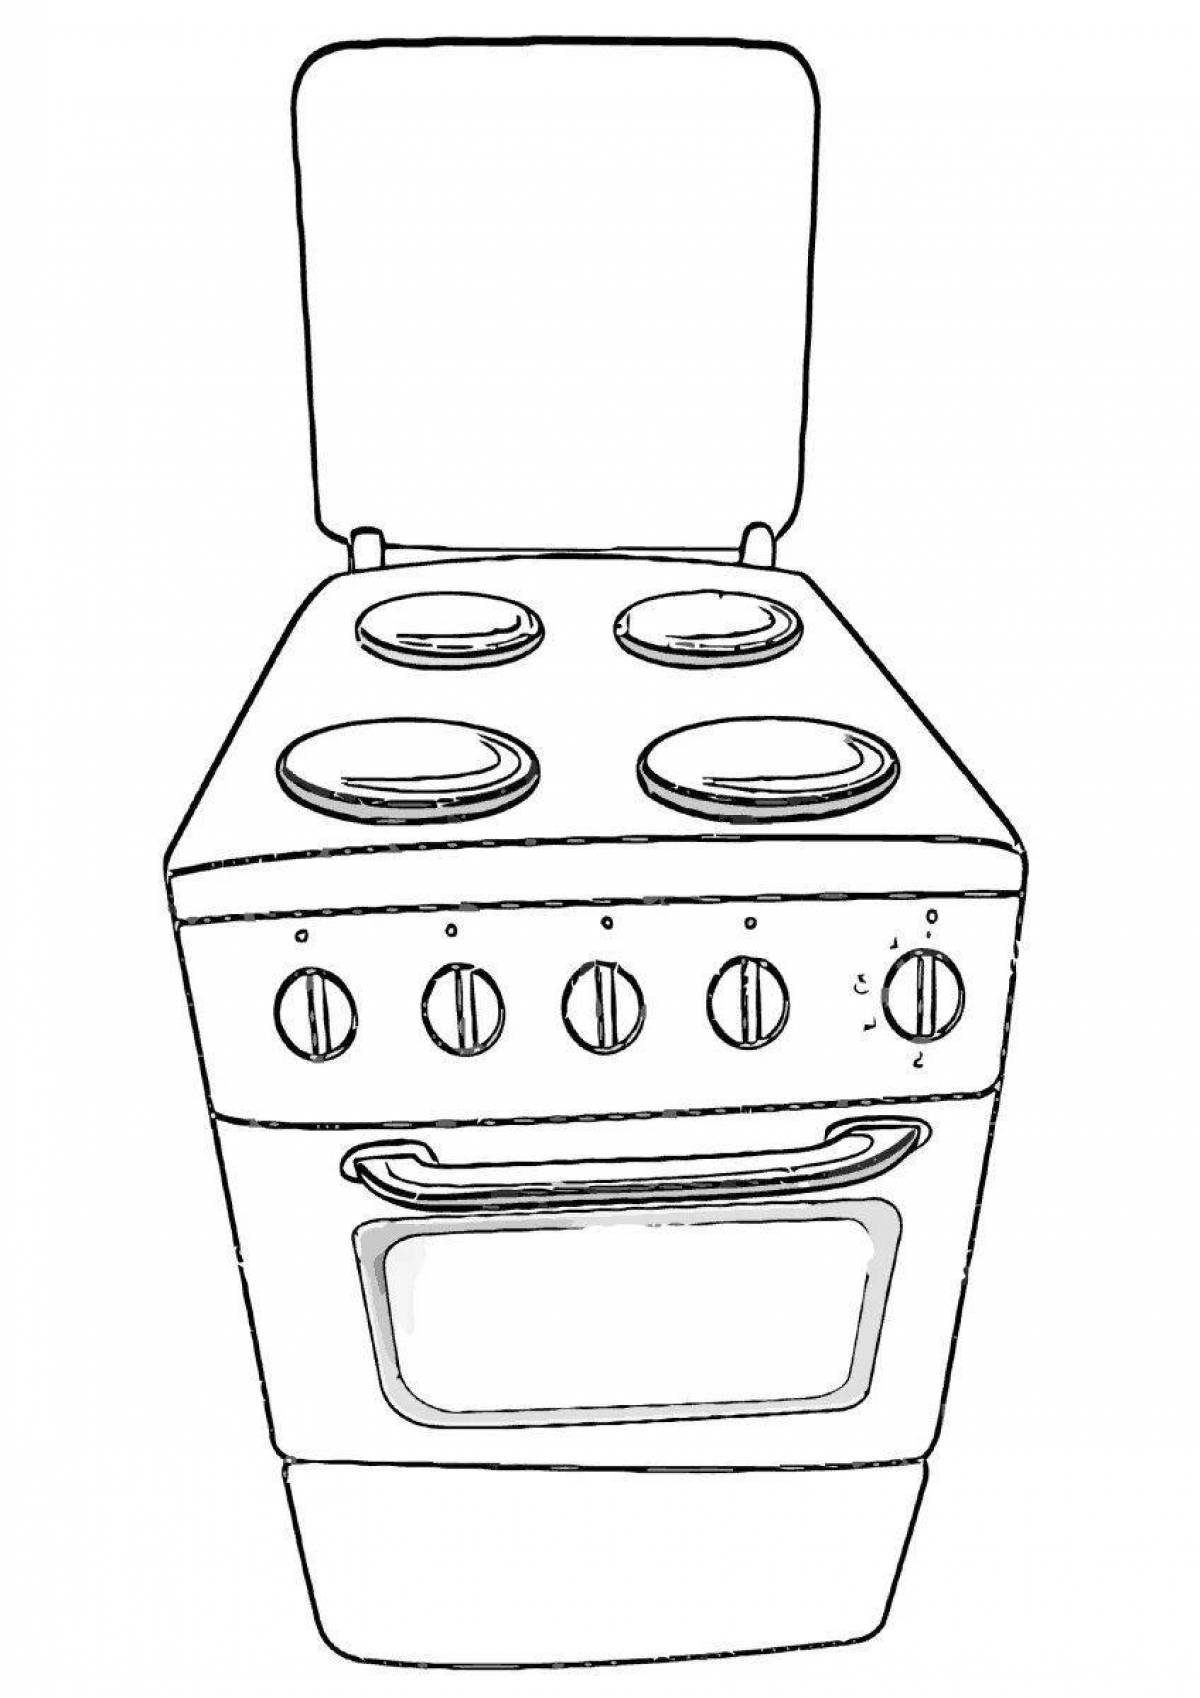 Humorous coloring house appliances for preschoolers